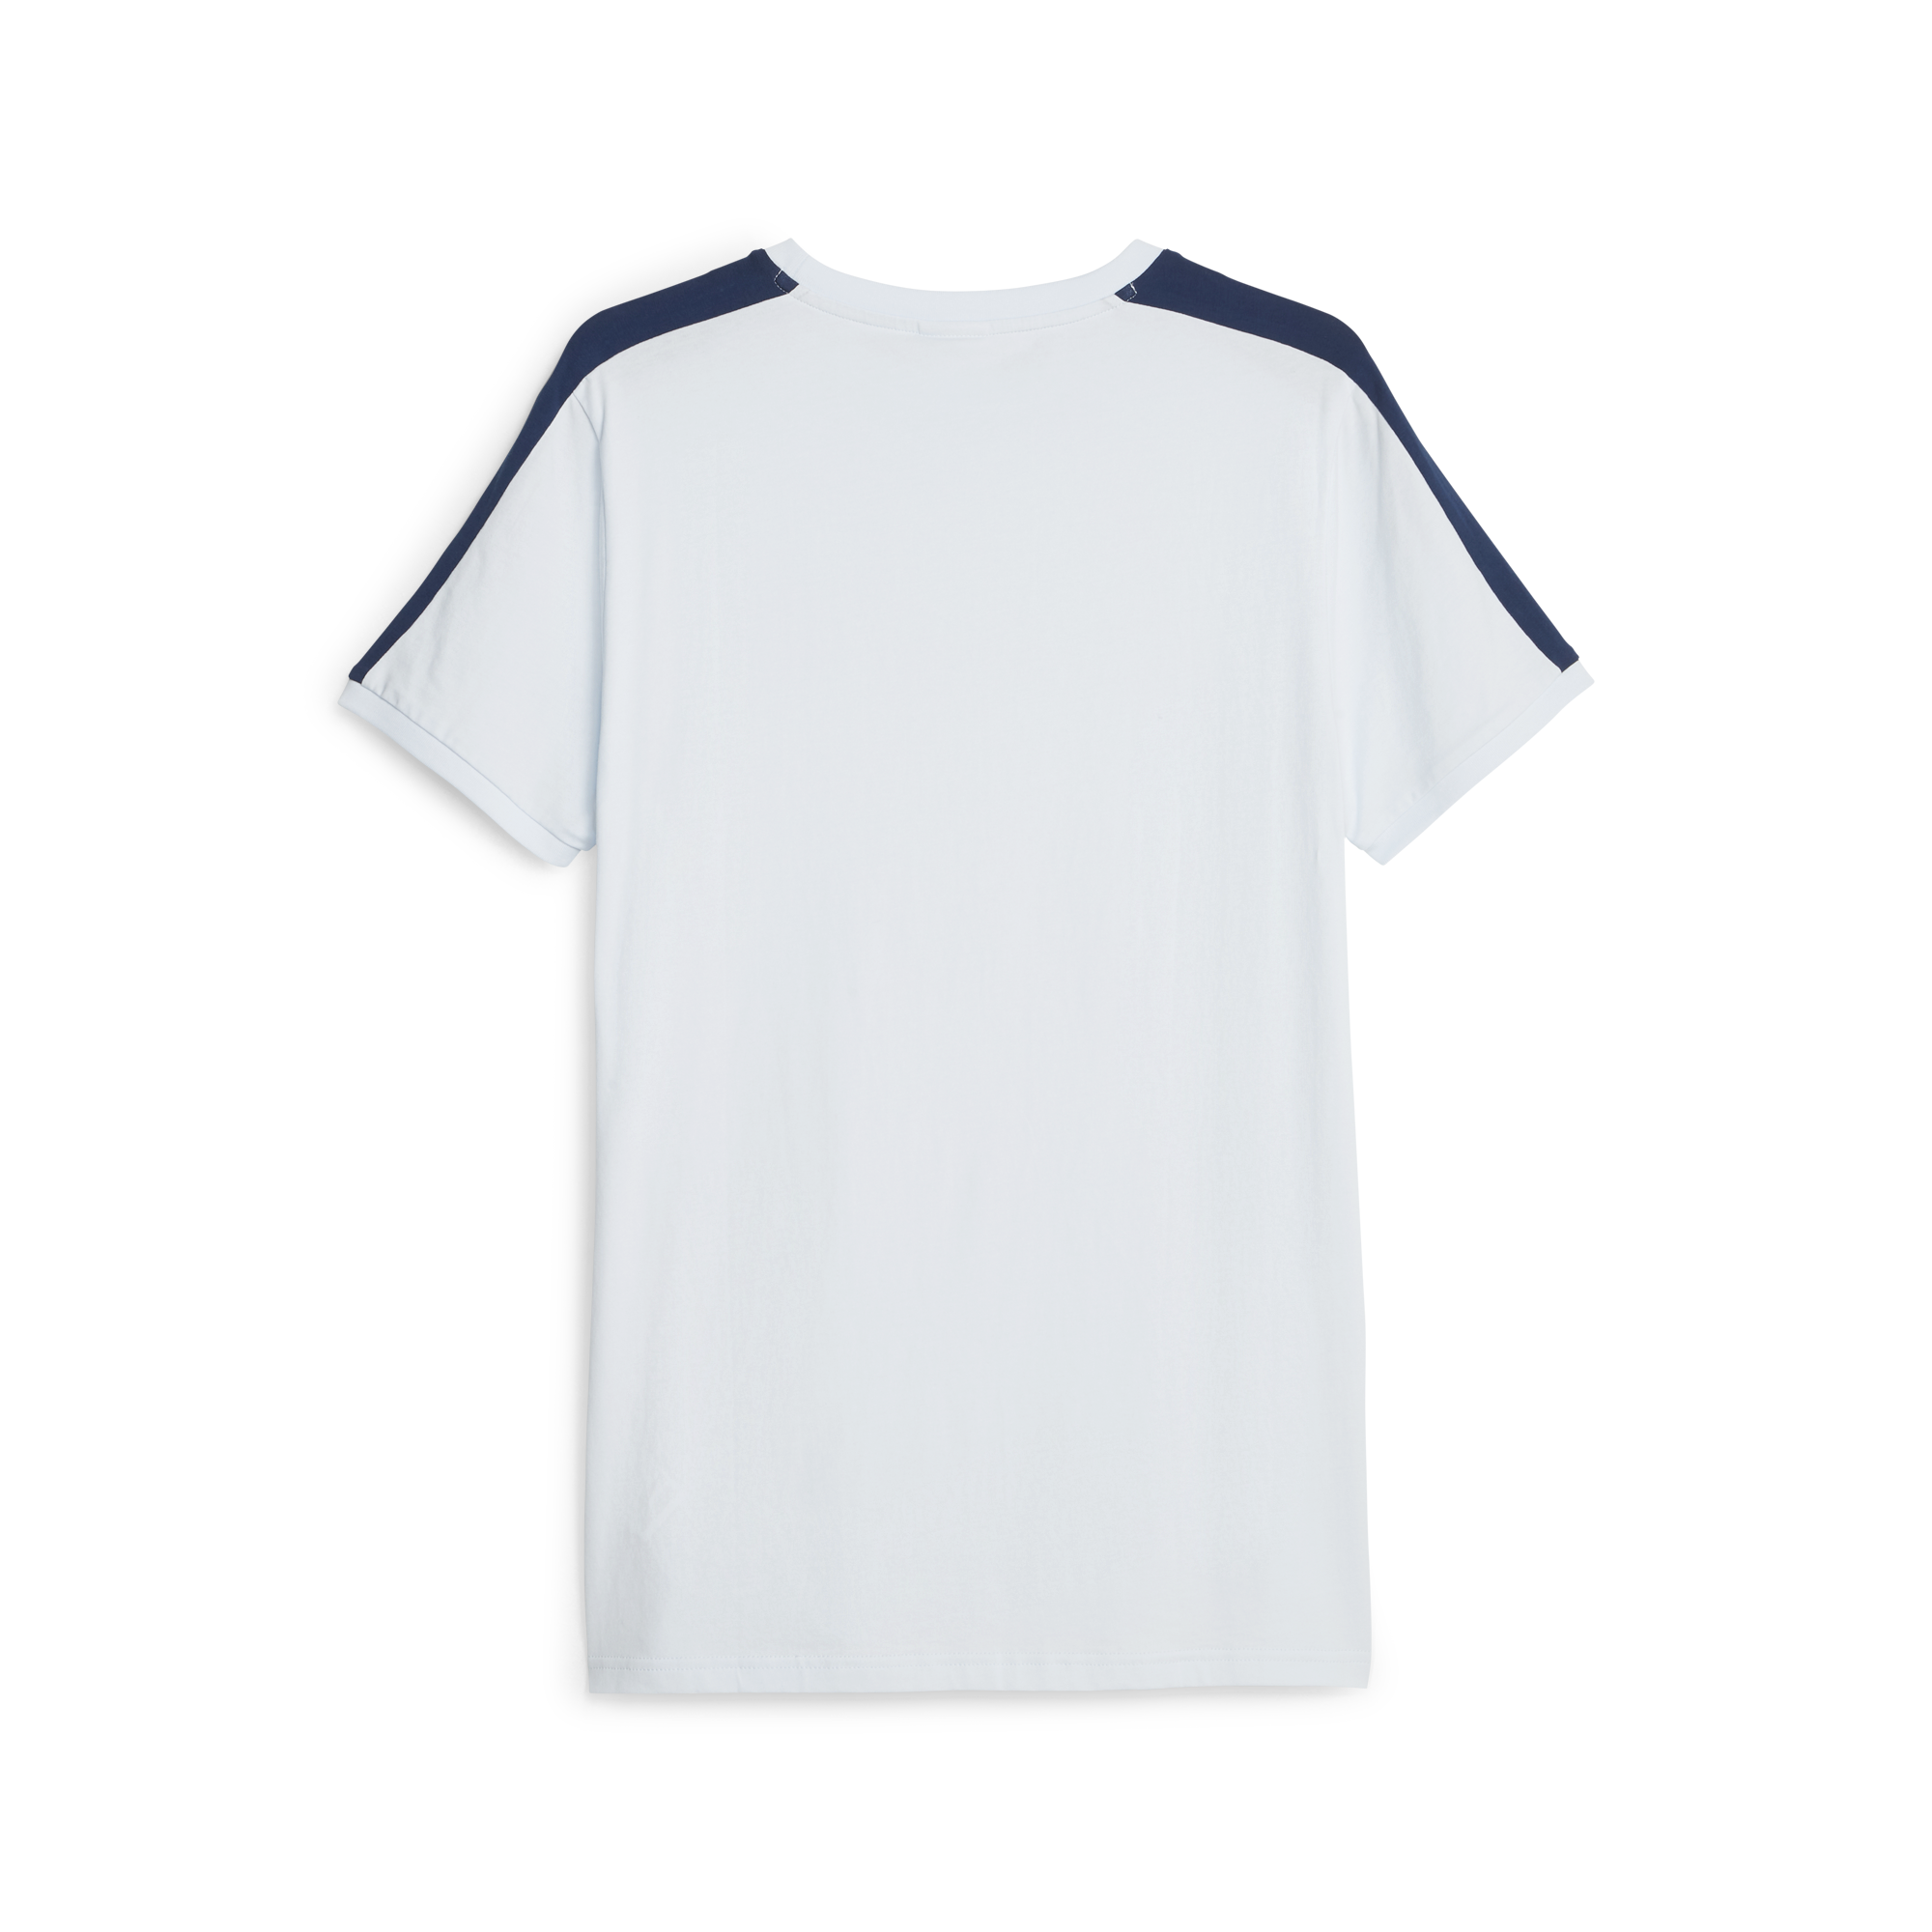 Puma T7 ICONIC Tee Icy Blue-persian blue